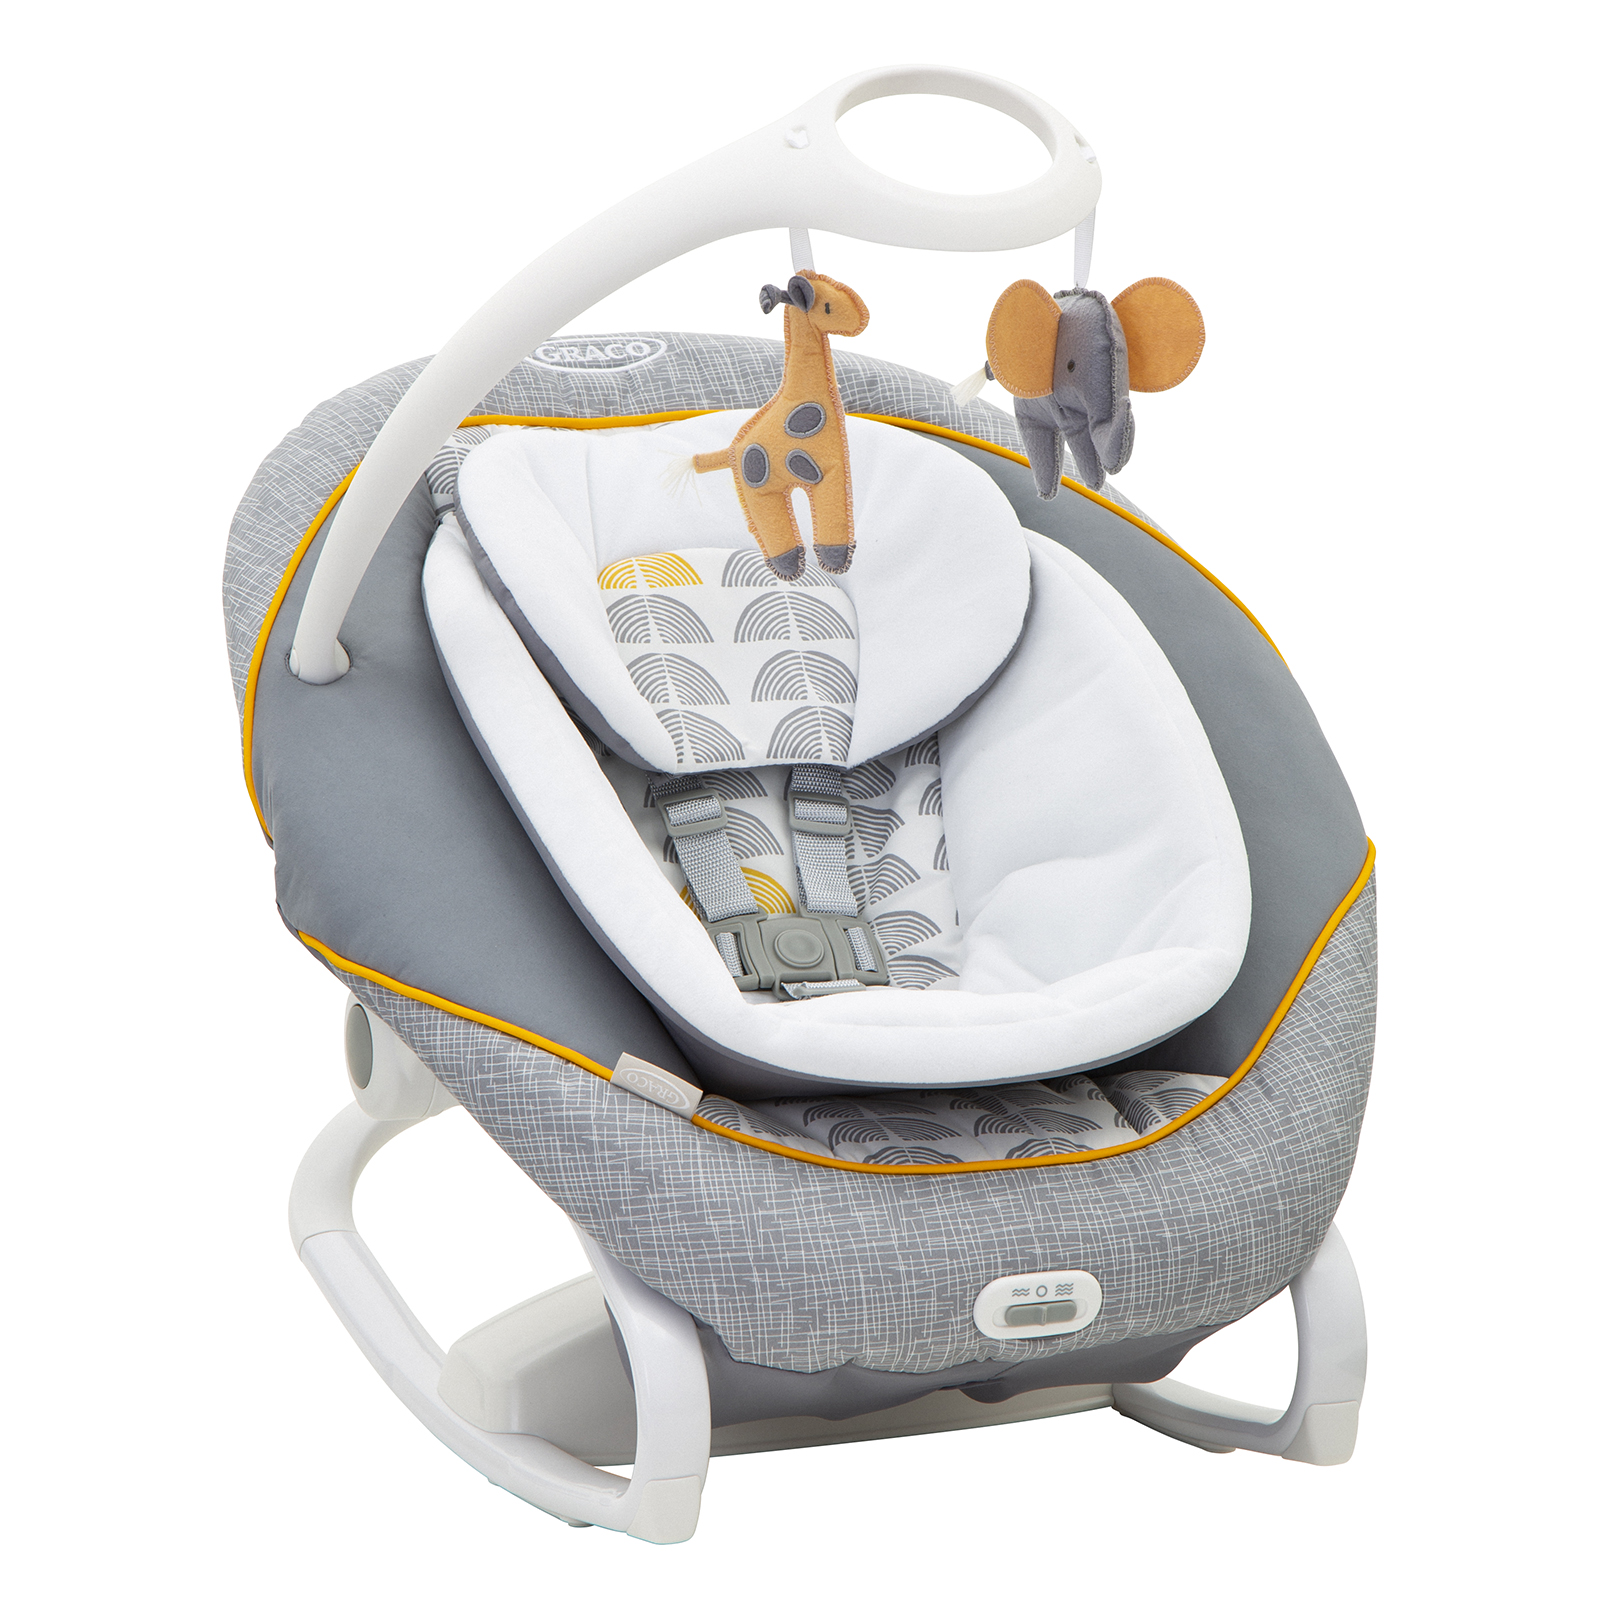 Graco All Ways Soother Buy Sounds Horizon Vibration Swing 2in1 Online4baby – with / Rocker & Grey at Musical 